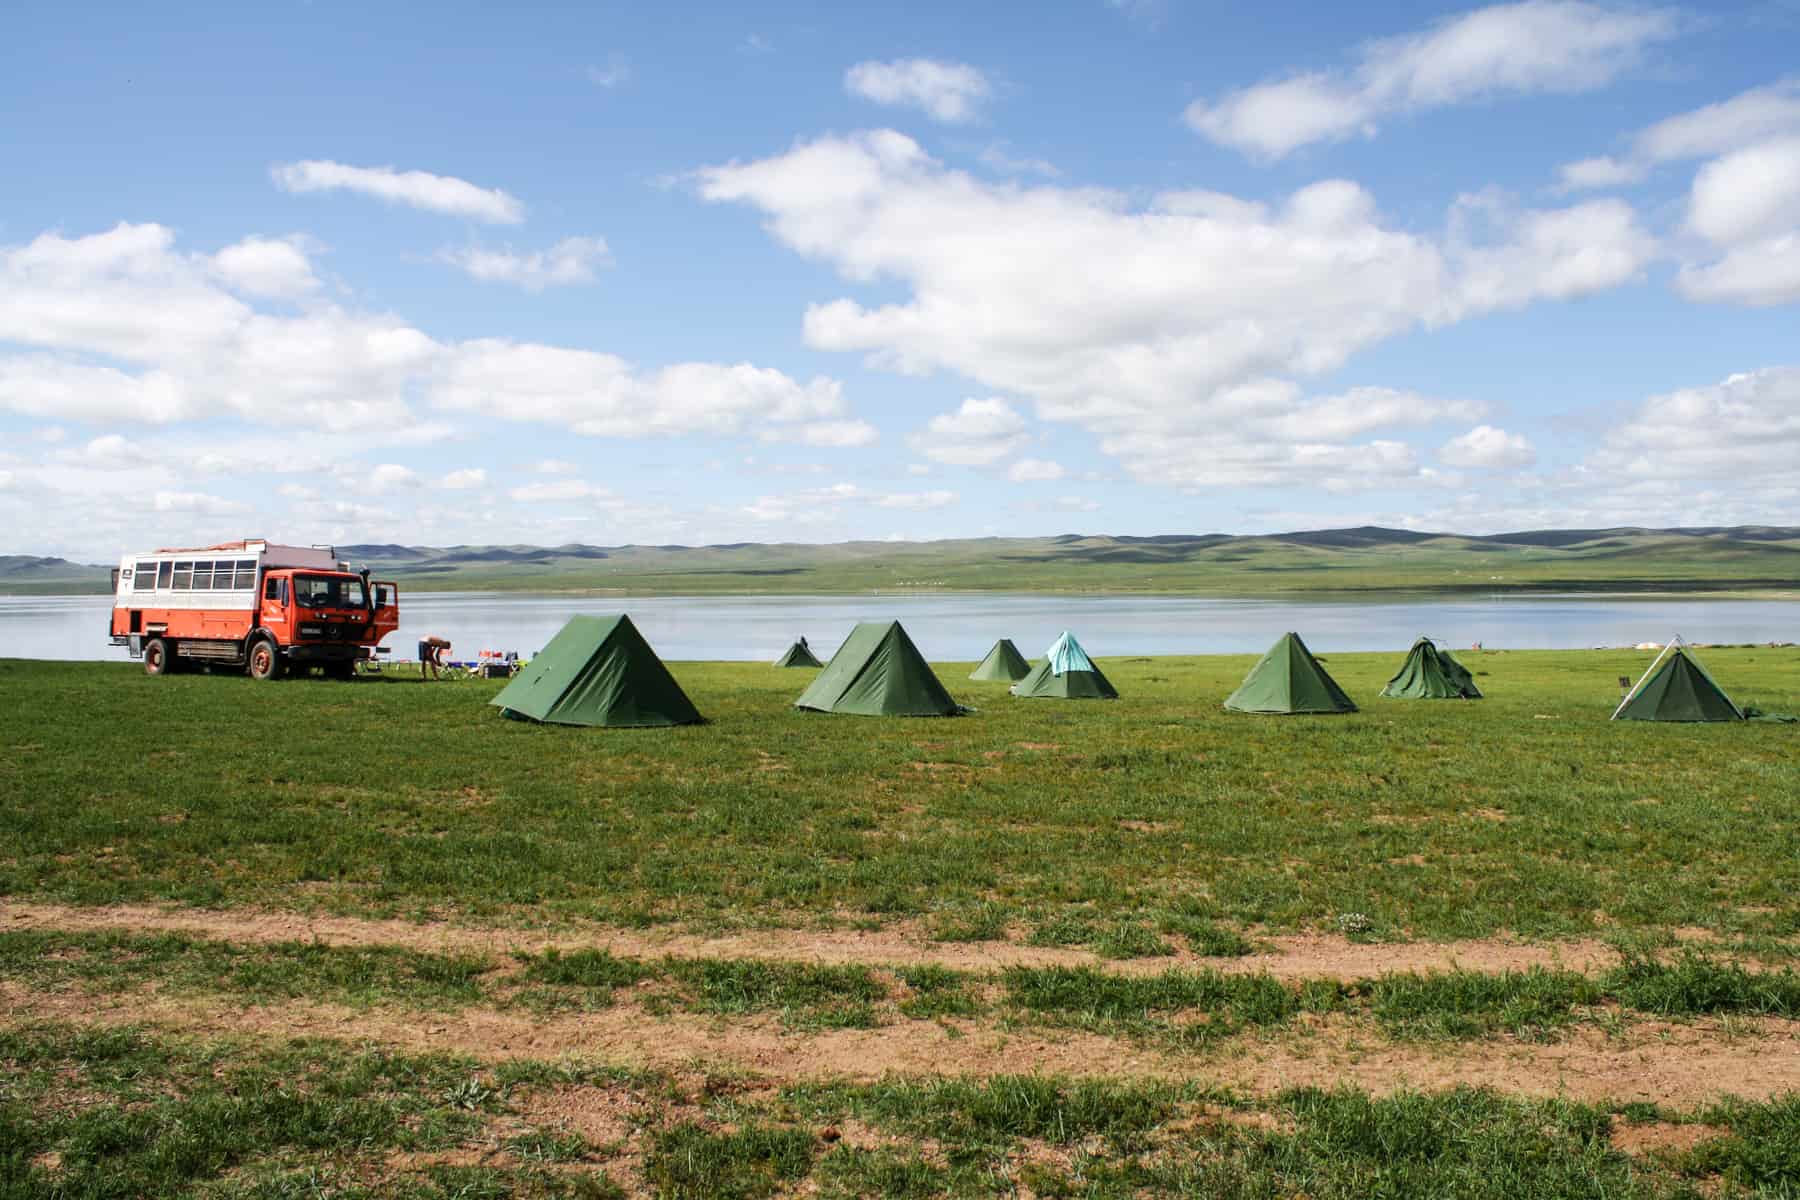 An orange overland truck and rows of green tents besides the wide Ugii Lake in Mongolia